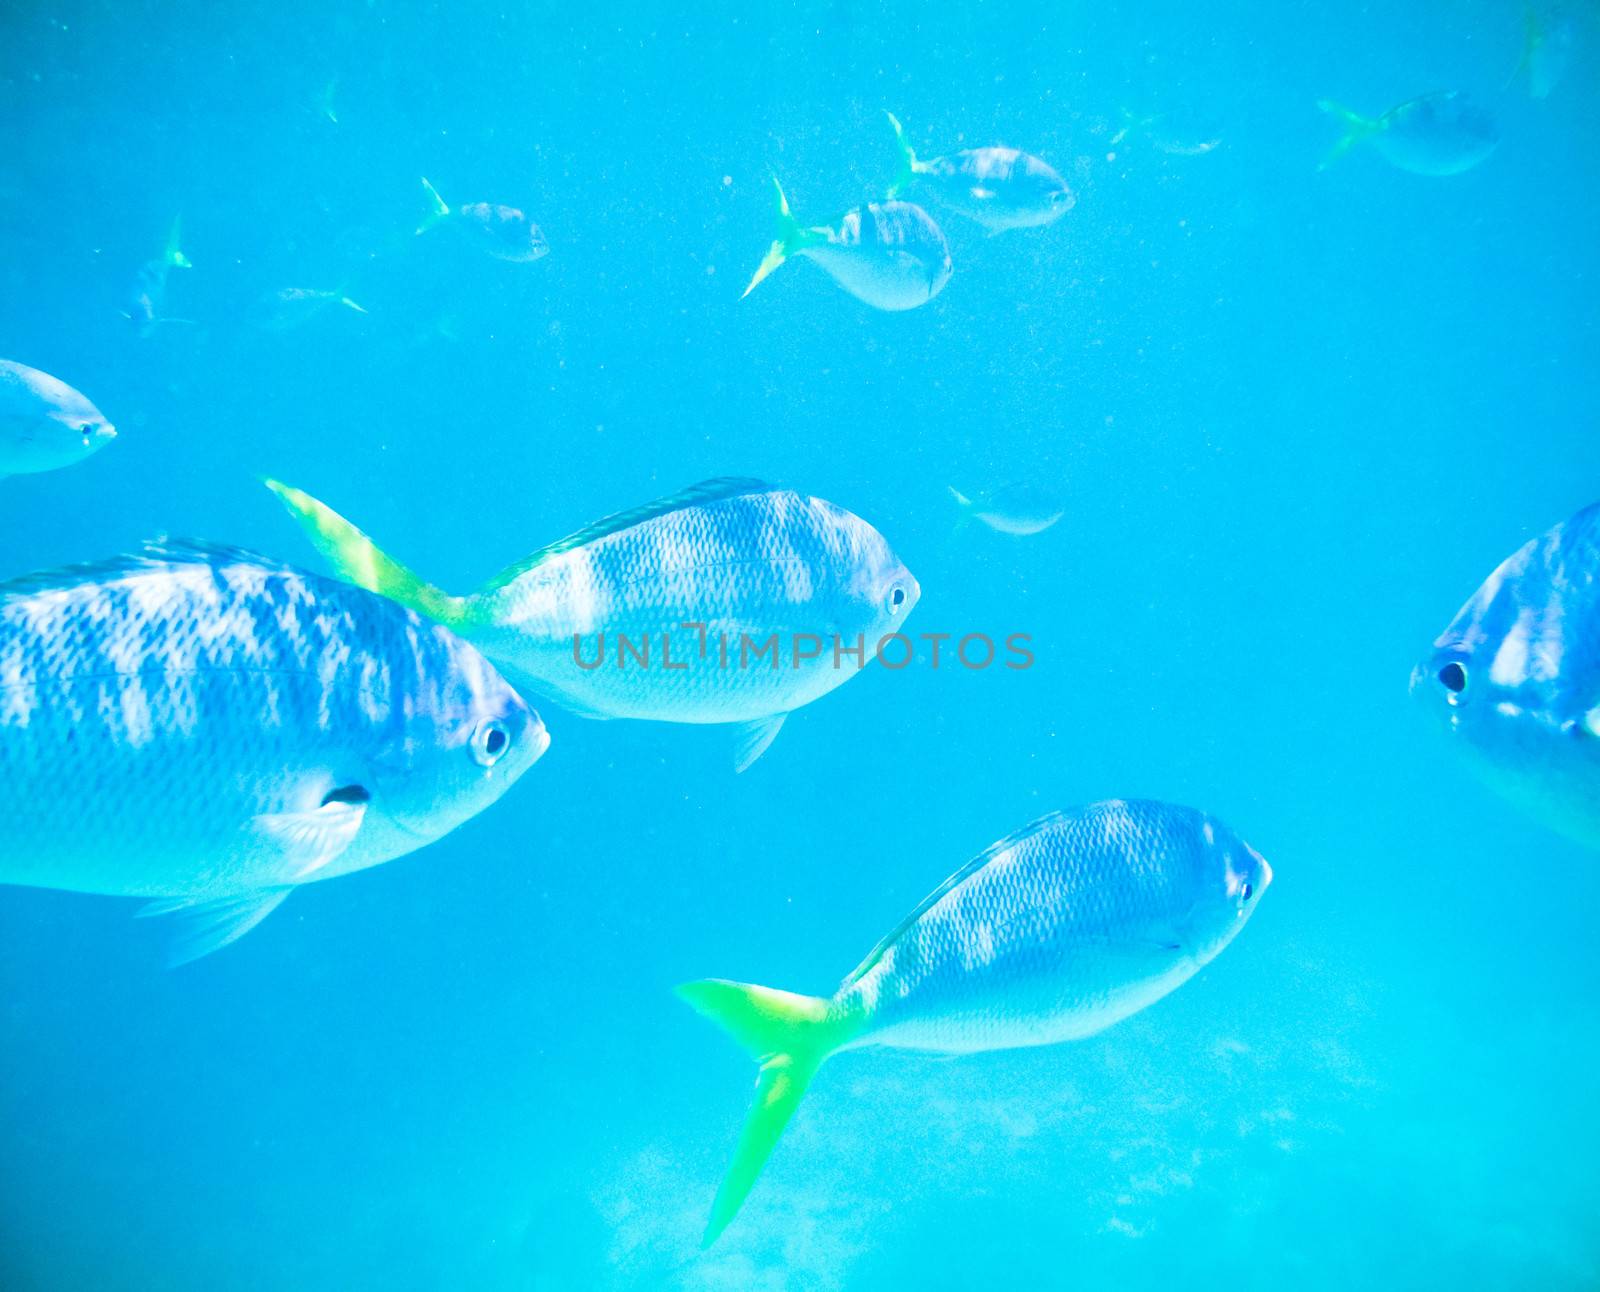 Underwater image with fish swiming by jrstock